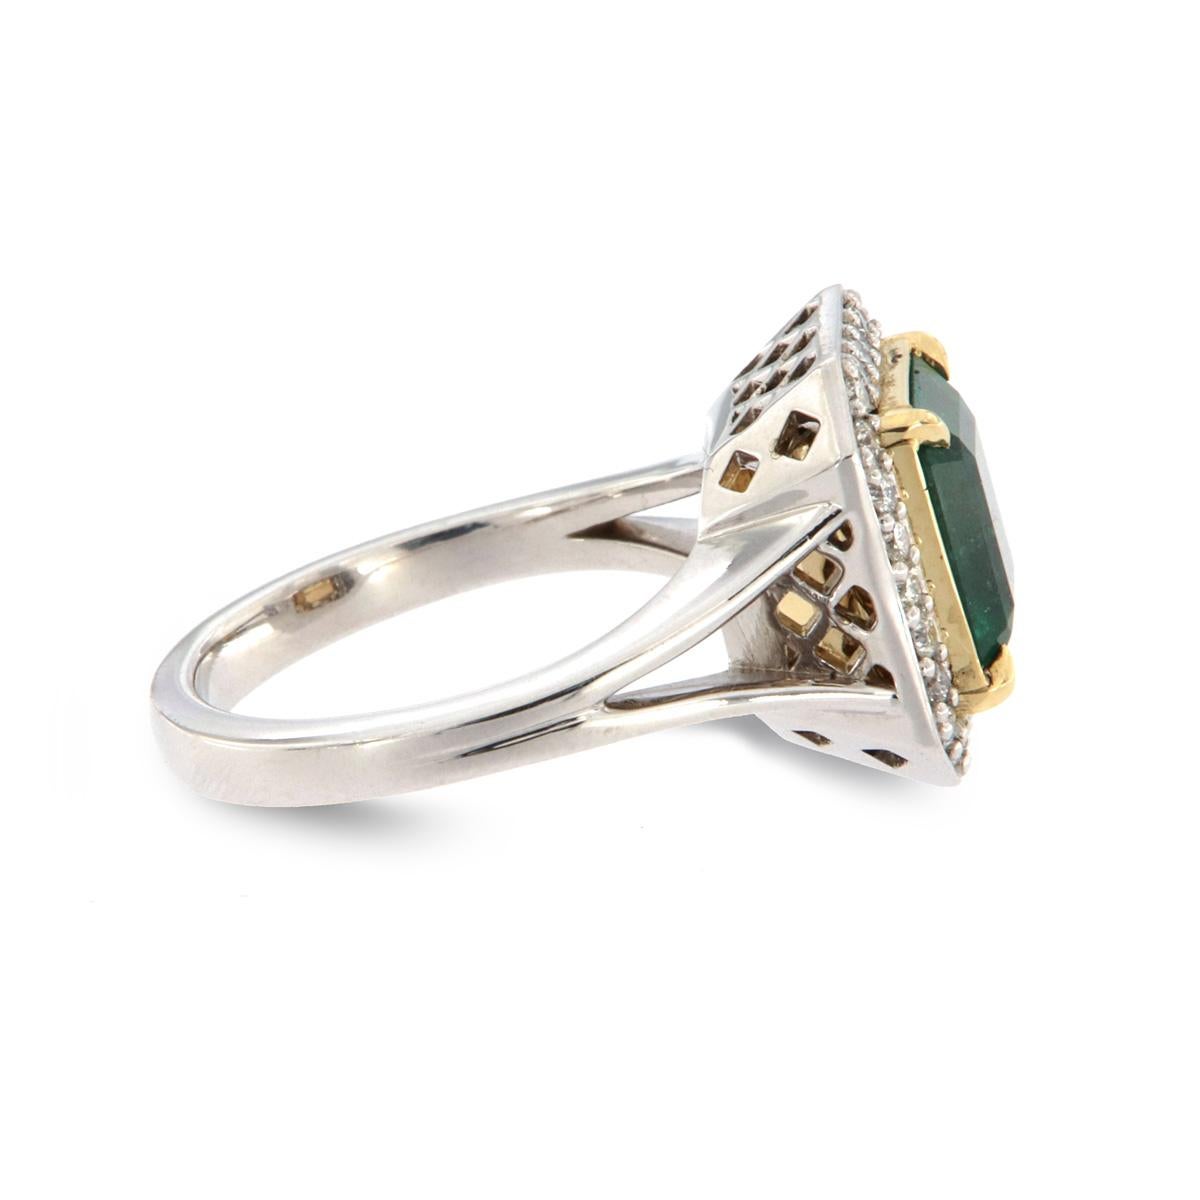 From our signature Sharon collection of exquisite red carpet pieces, this handcrafted ring is centering an Asscher-shaped 4.08 Carat top-quality, vibrant green color Ethiopian Emerald in premium luster. A halo of 26 round brilliant diamonds in